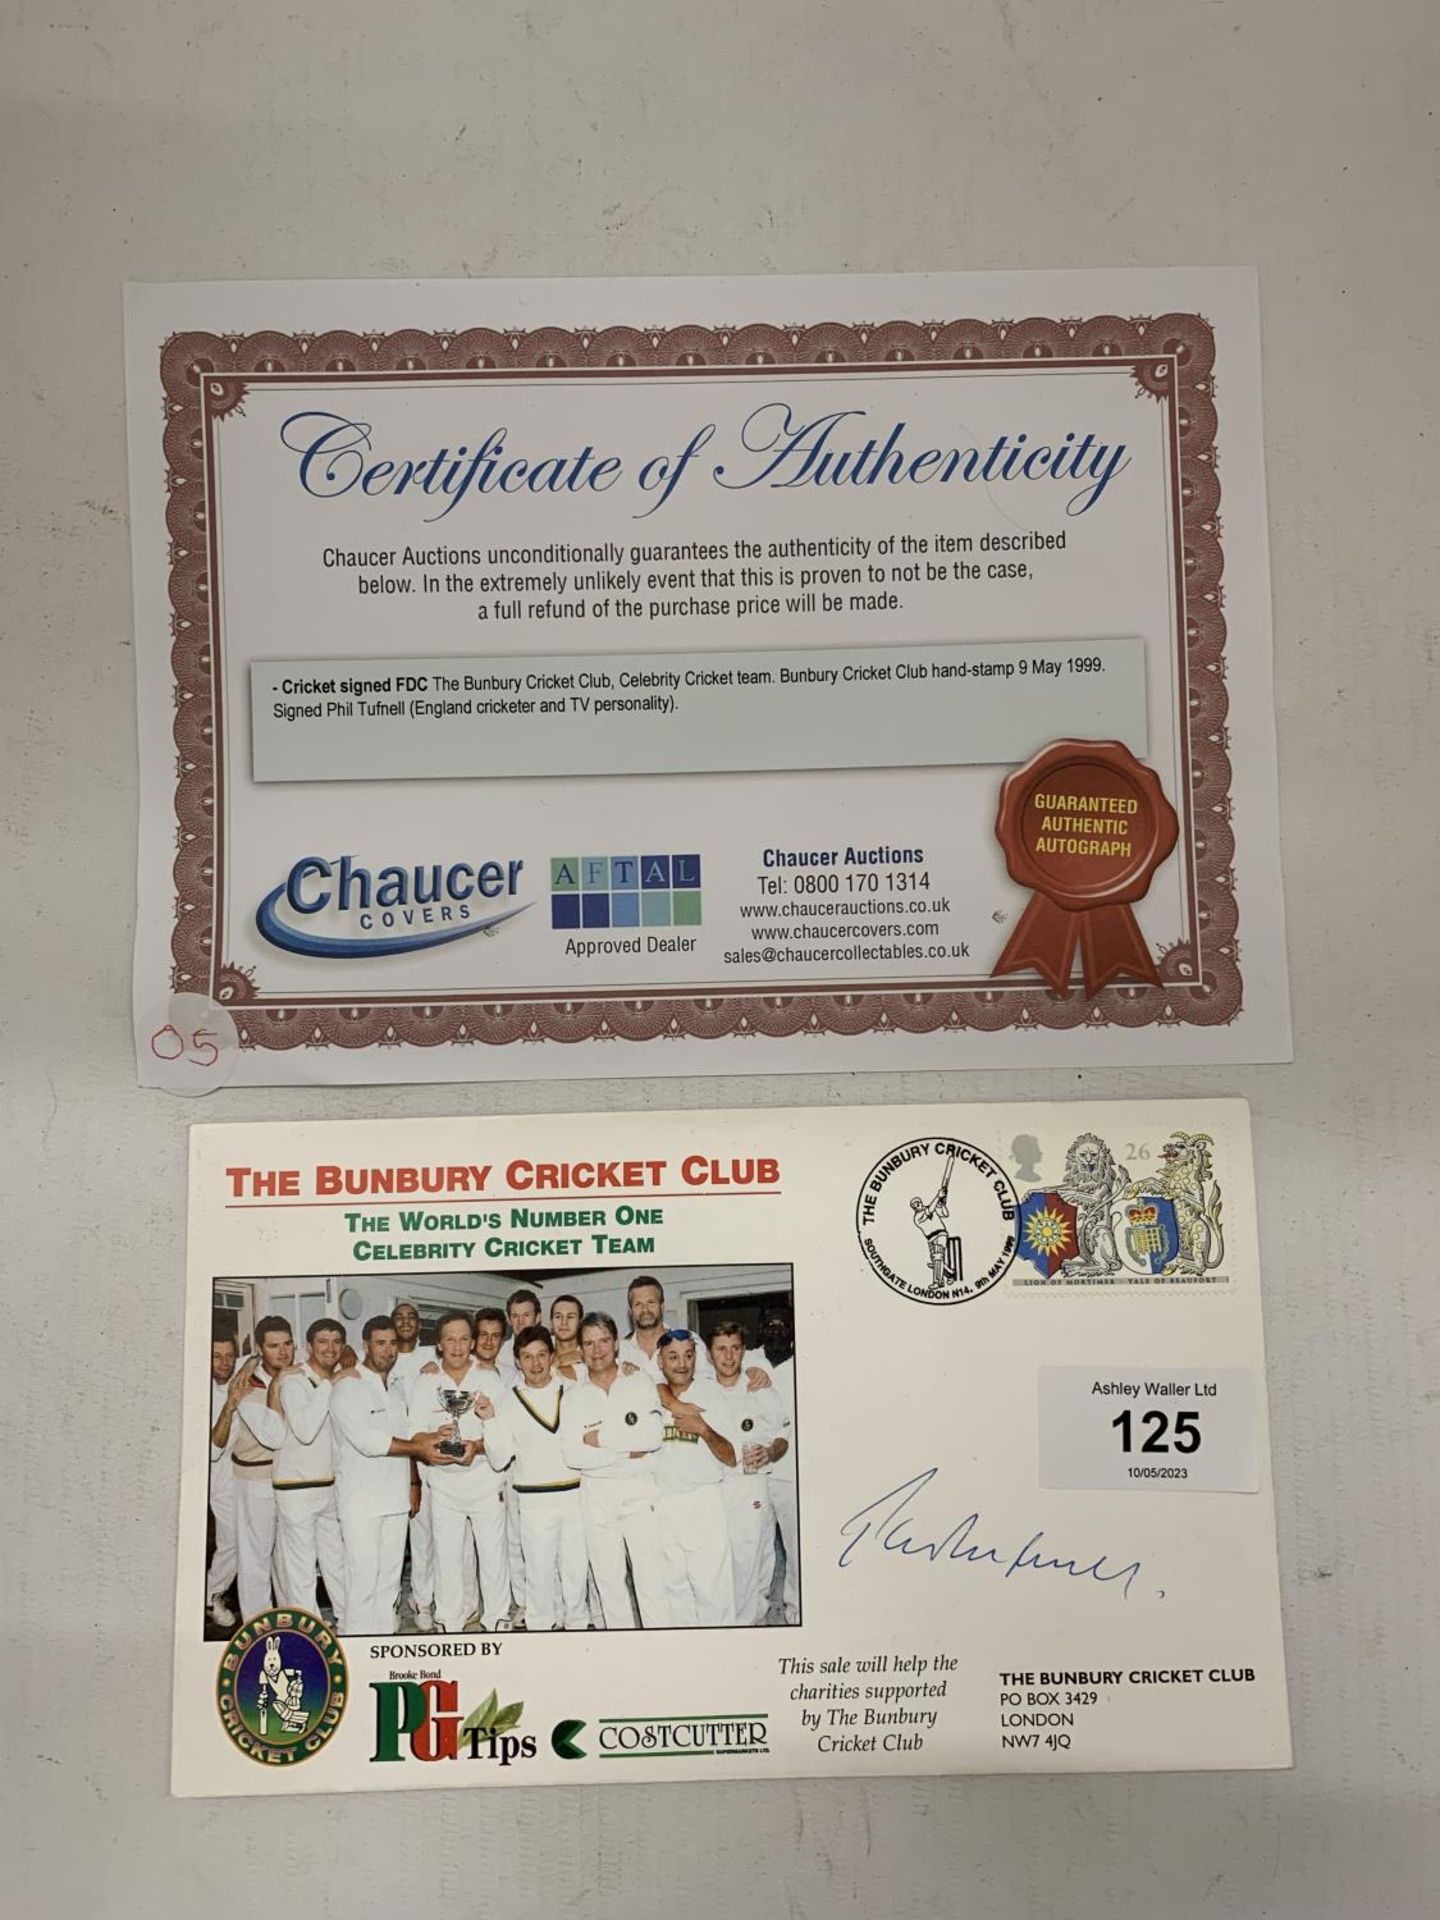 A BUNBURY CRICKET CLUB FIRST DAY COVER SIGNED BY PHIL TUFNELL WITH CERTIFCATE OF AUTHENTICITY